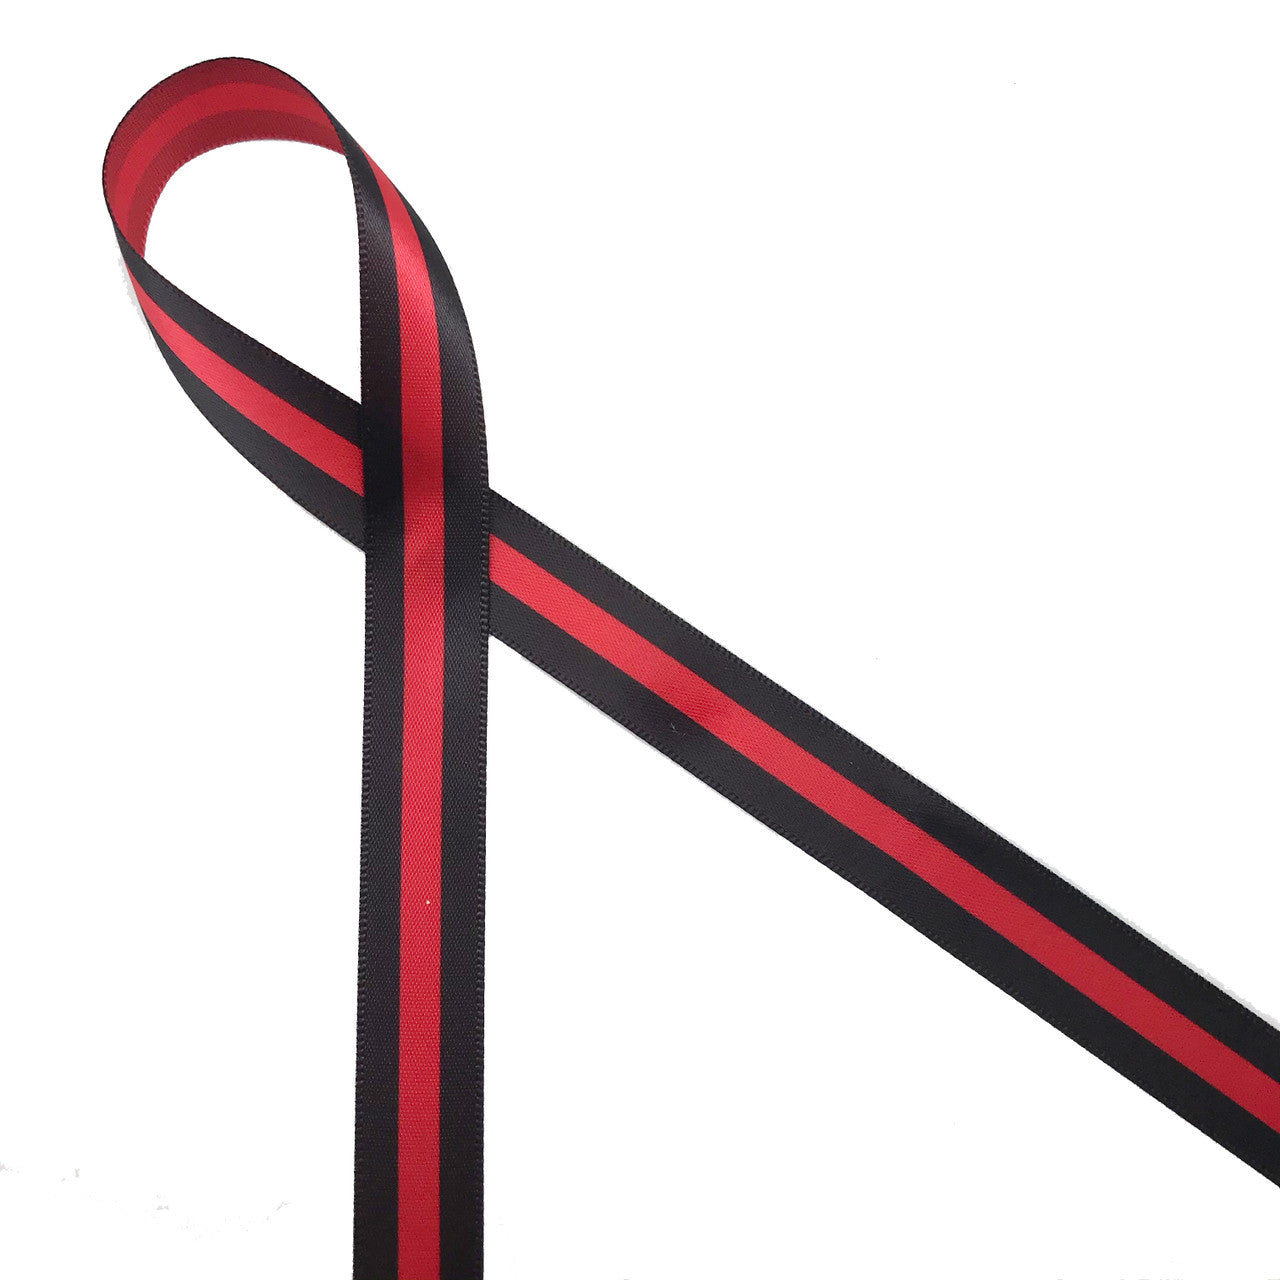 Firefighter thin red line ribbon printed on 5/8", 7/8" and 1.5" red single face satin